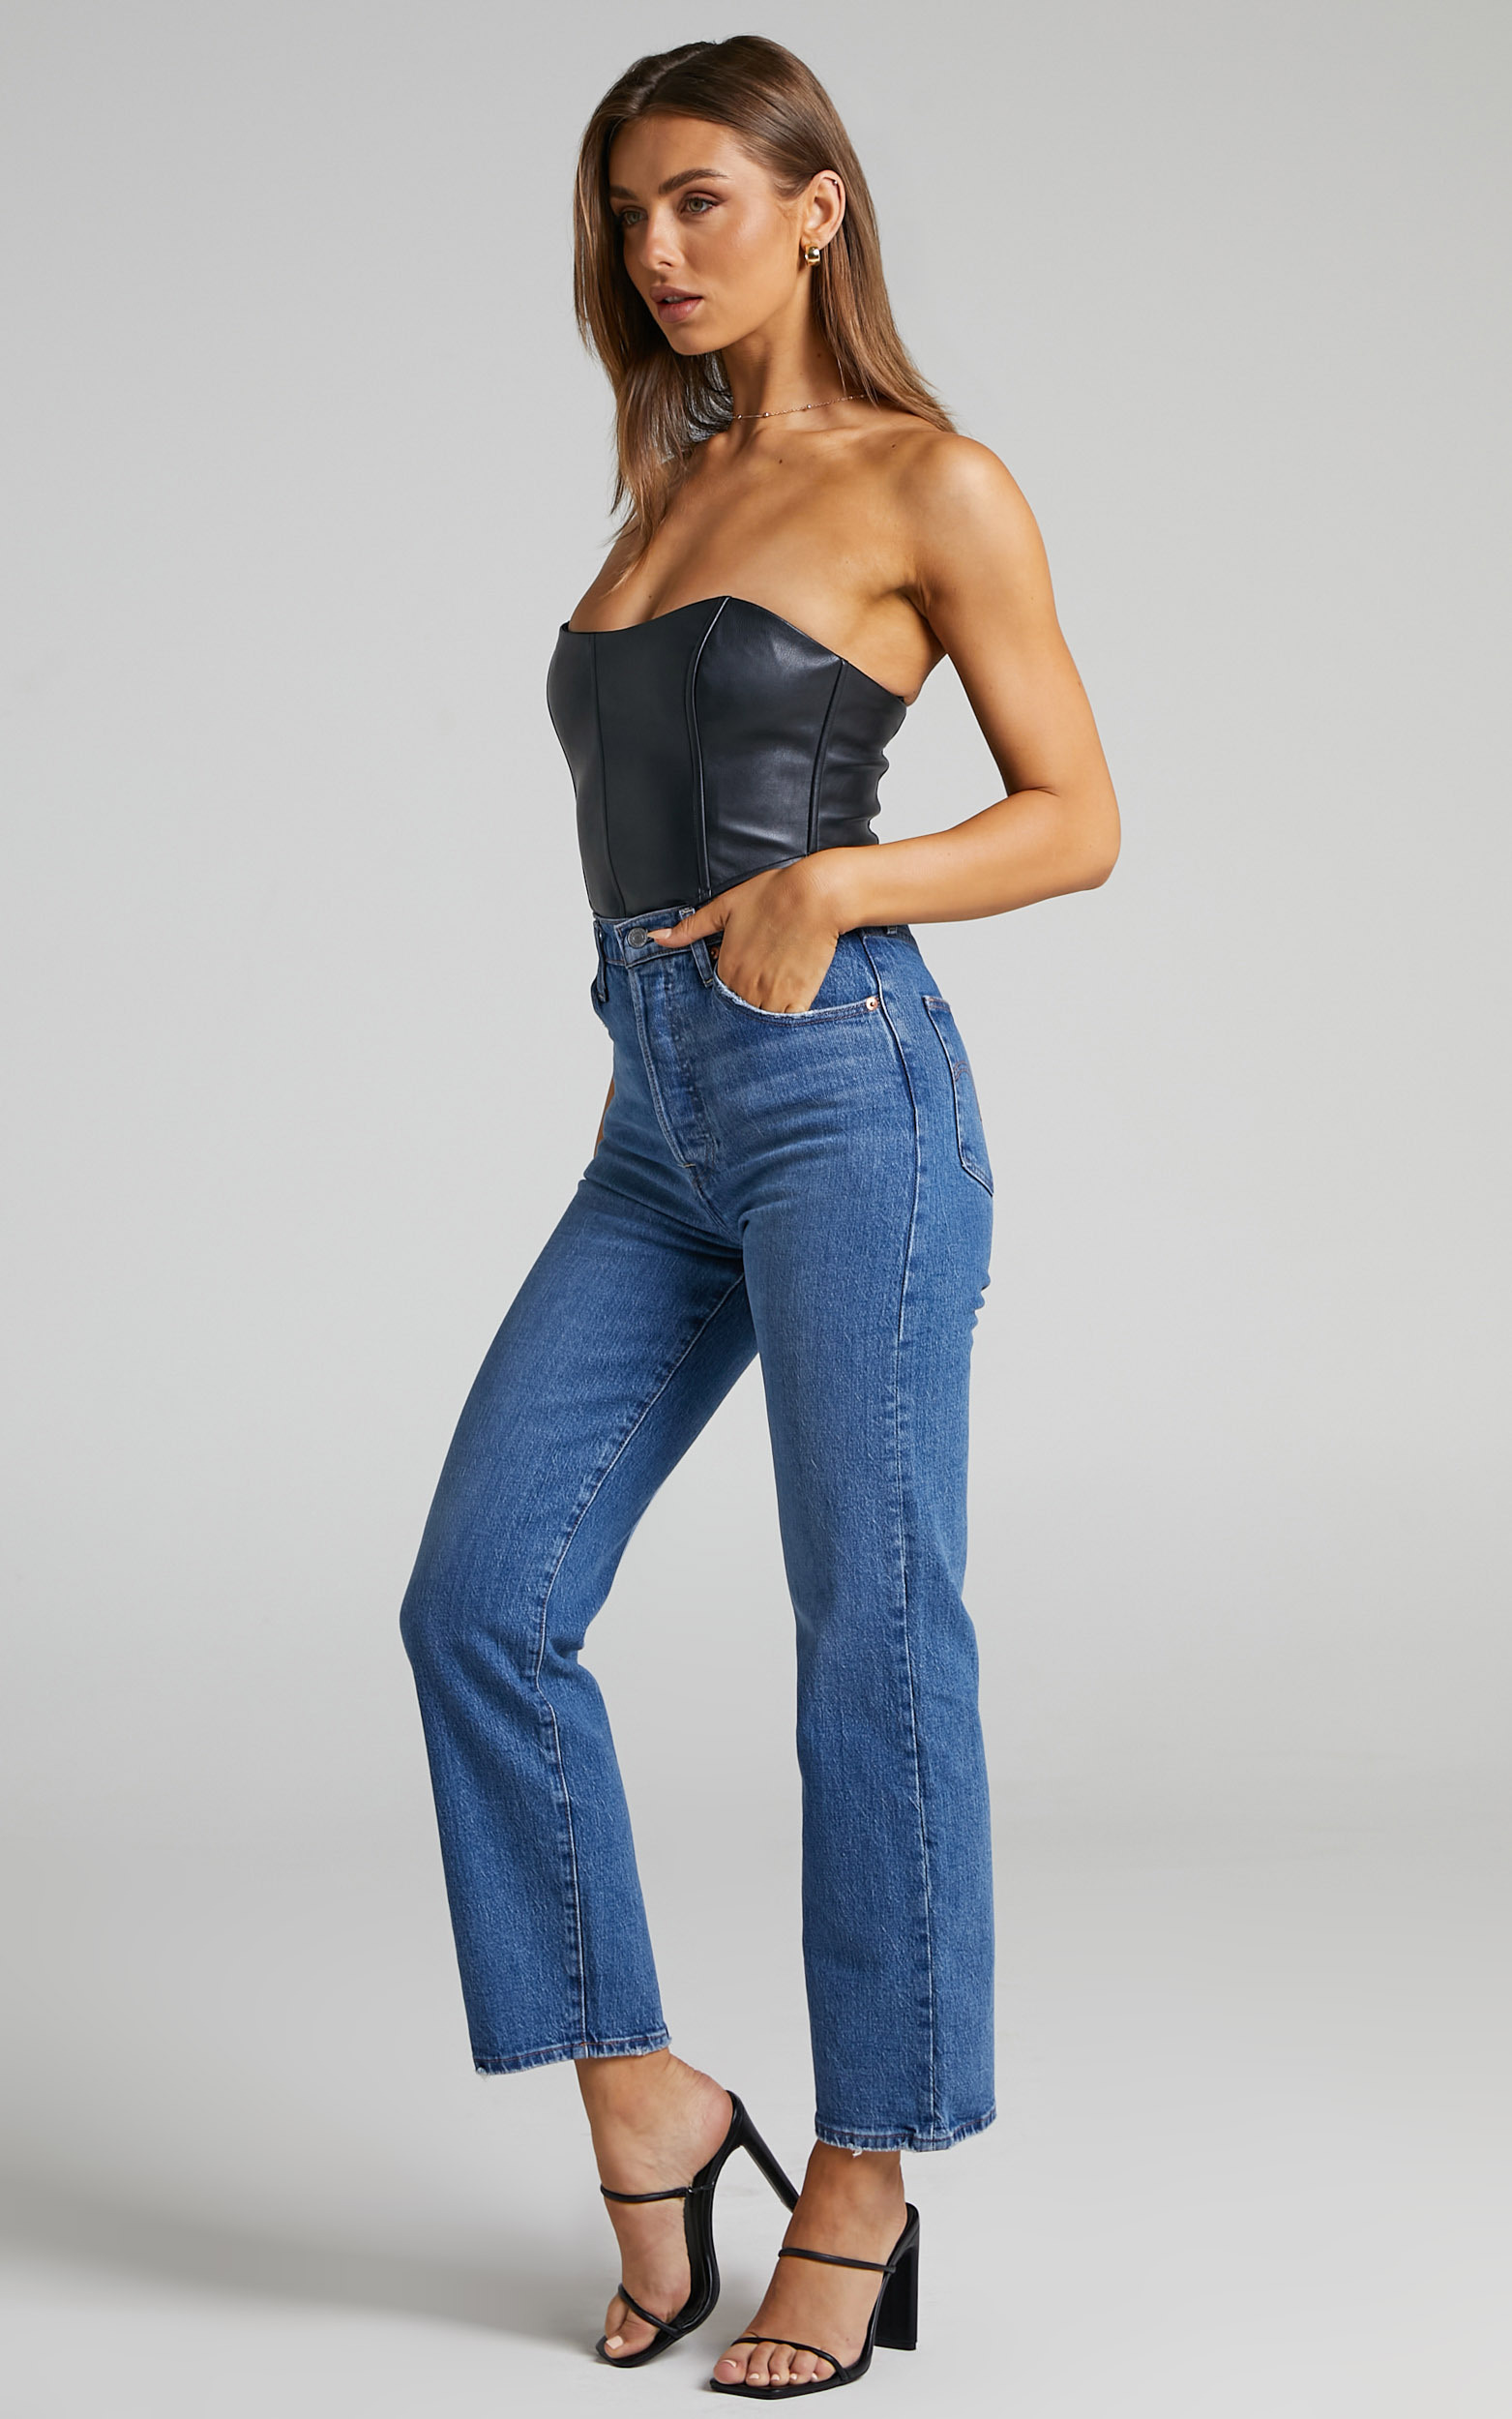 Levi's - Ribcage Straight Ankle Jeans in Jazz Jive Together - 06, BLU1, hi-res image number null